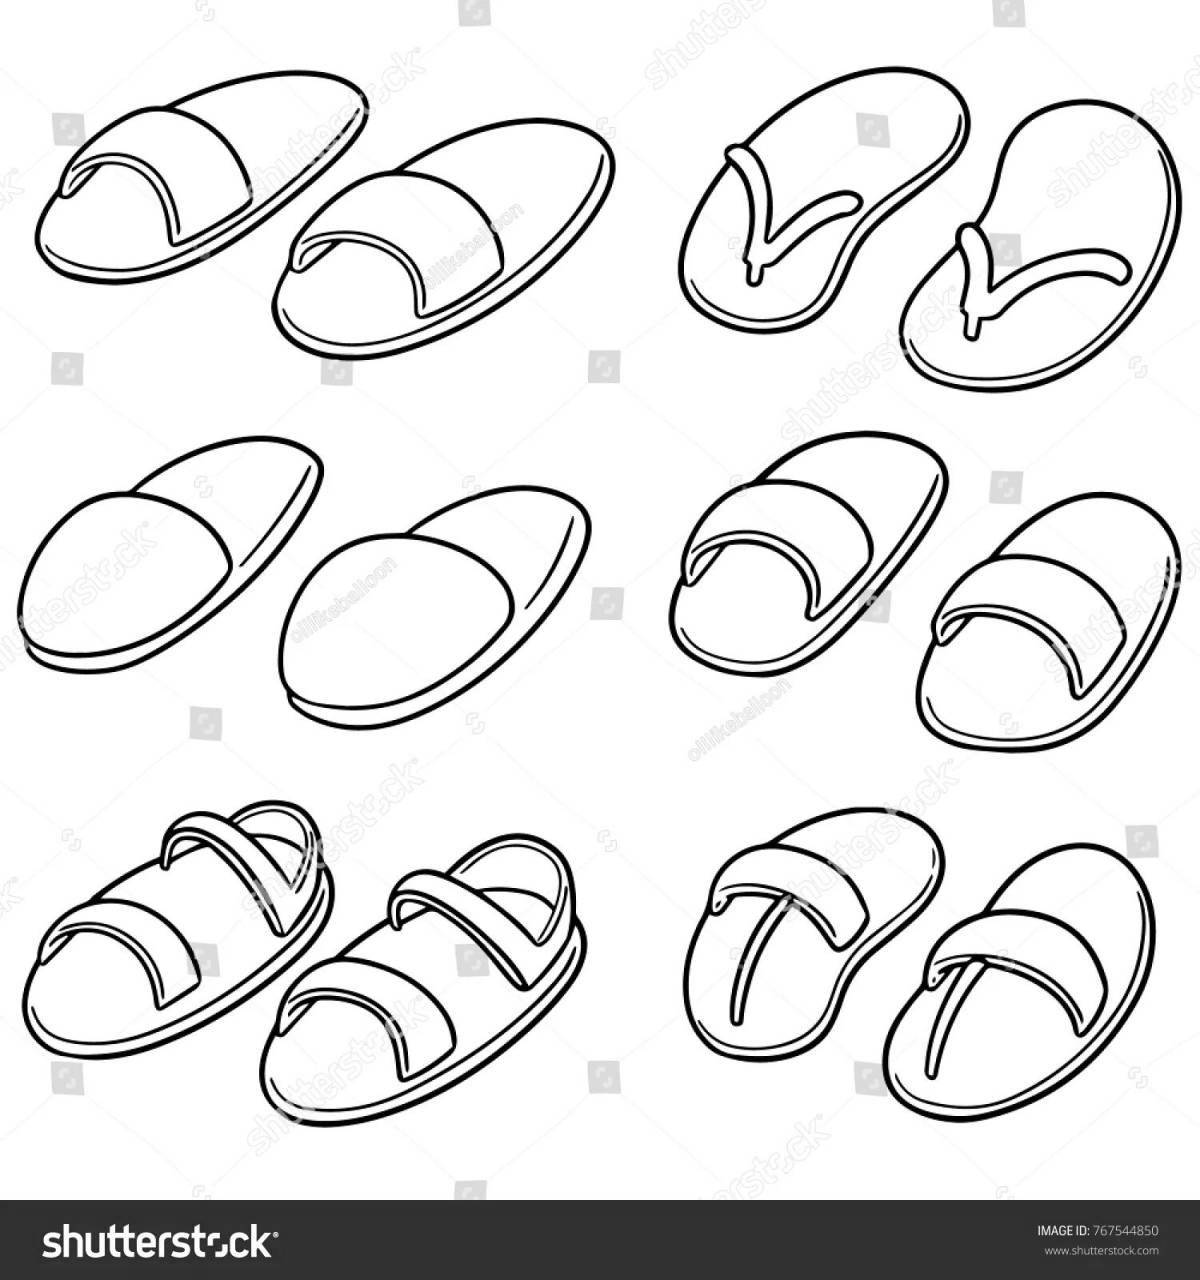 Coloring page adorable slippers for kids